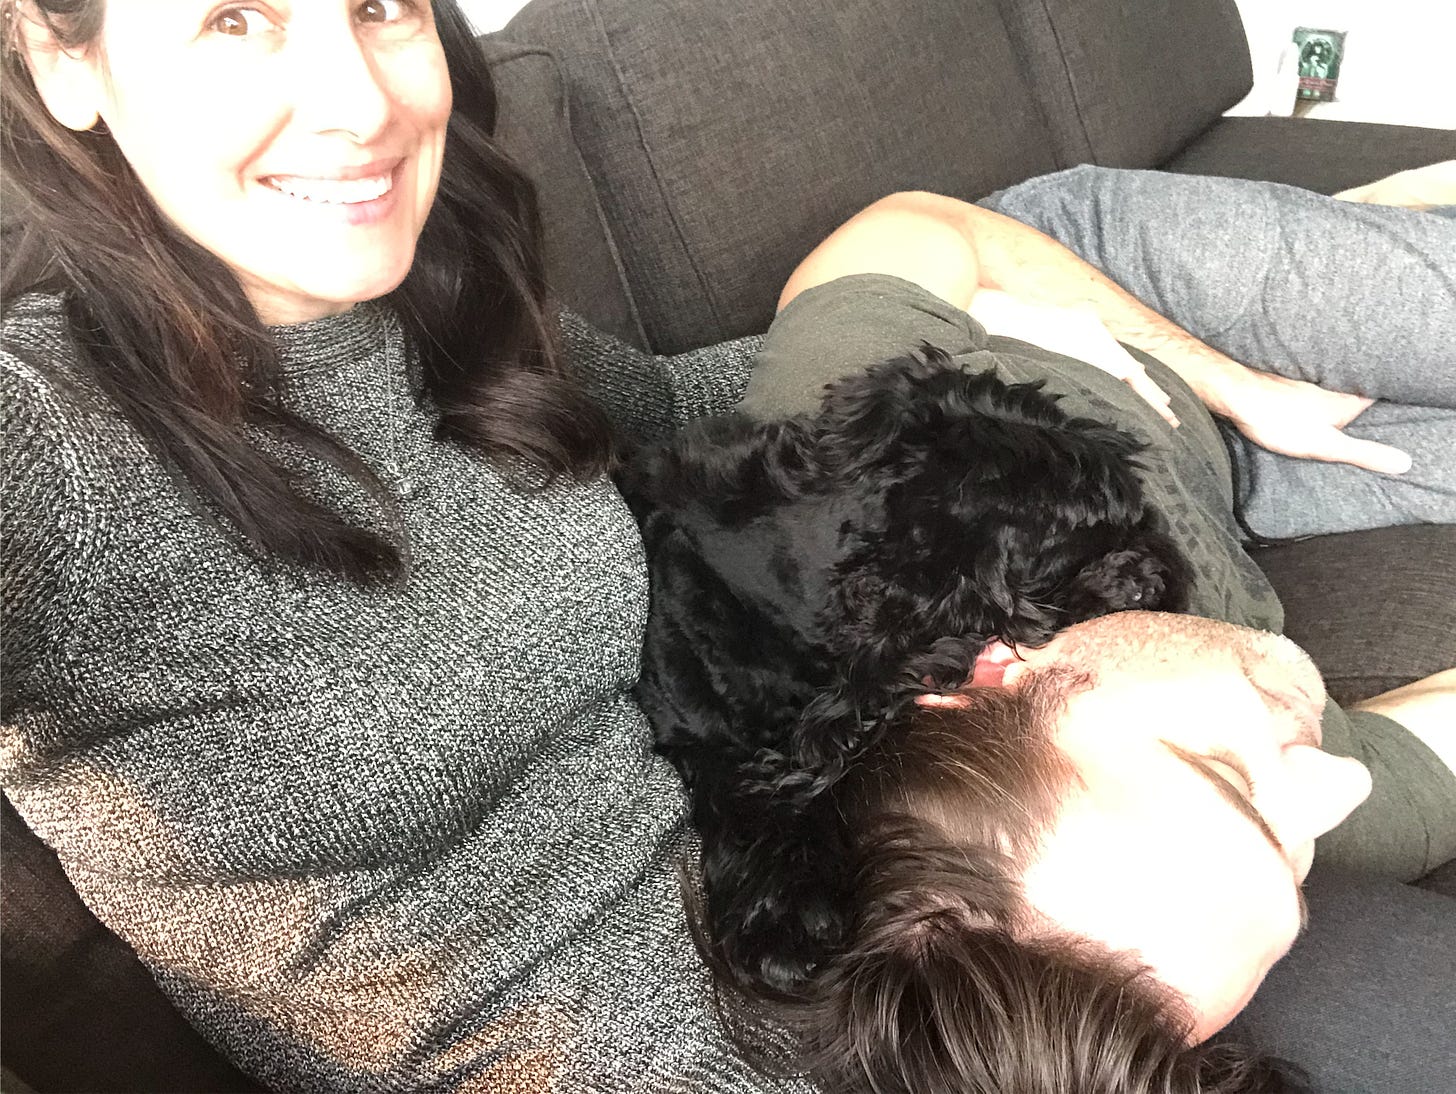 Woman smiling at camera while a guy and dog sleep in her lap